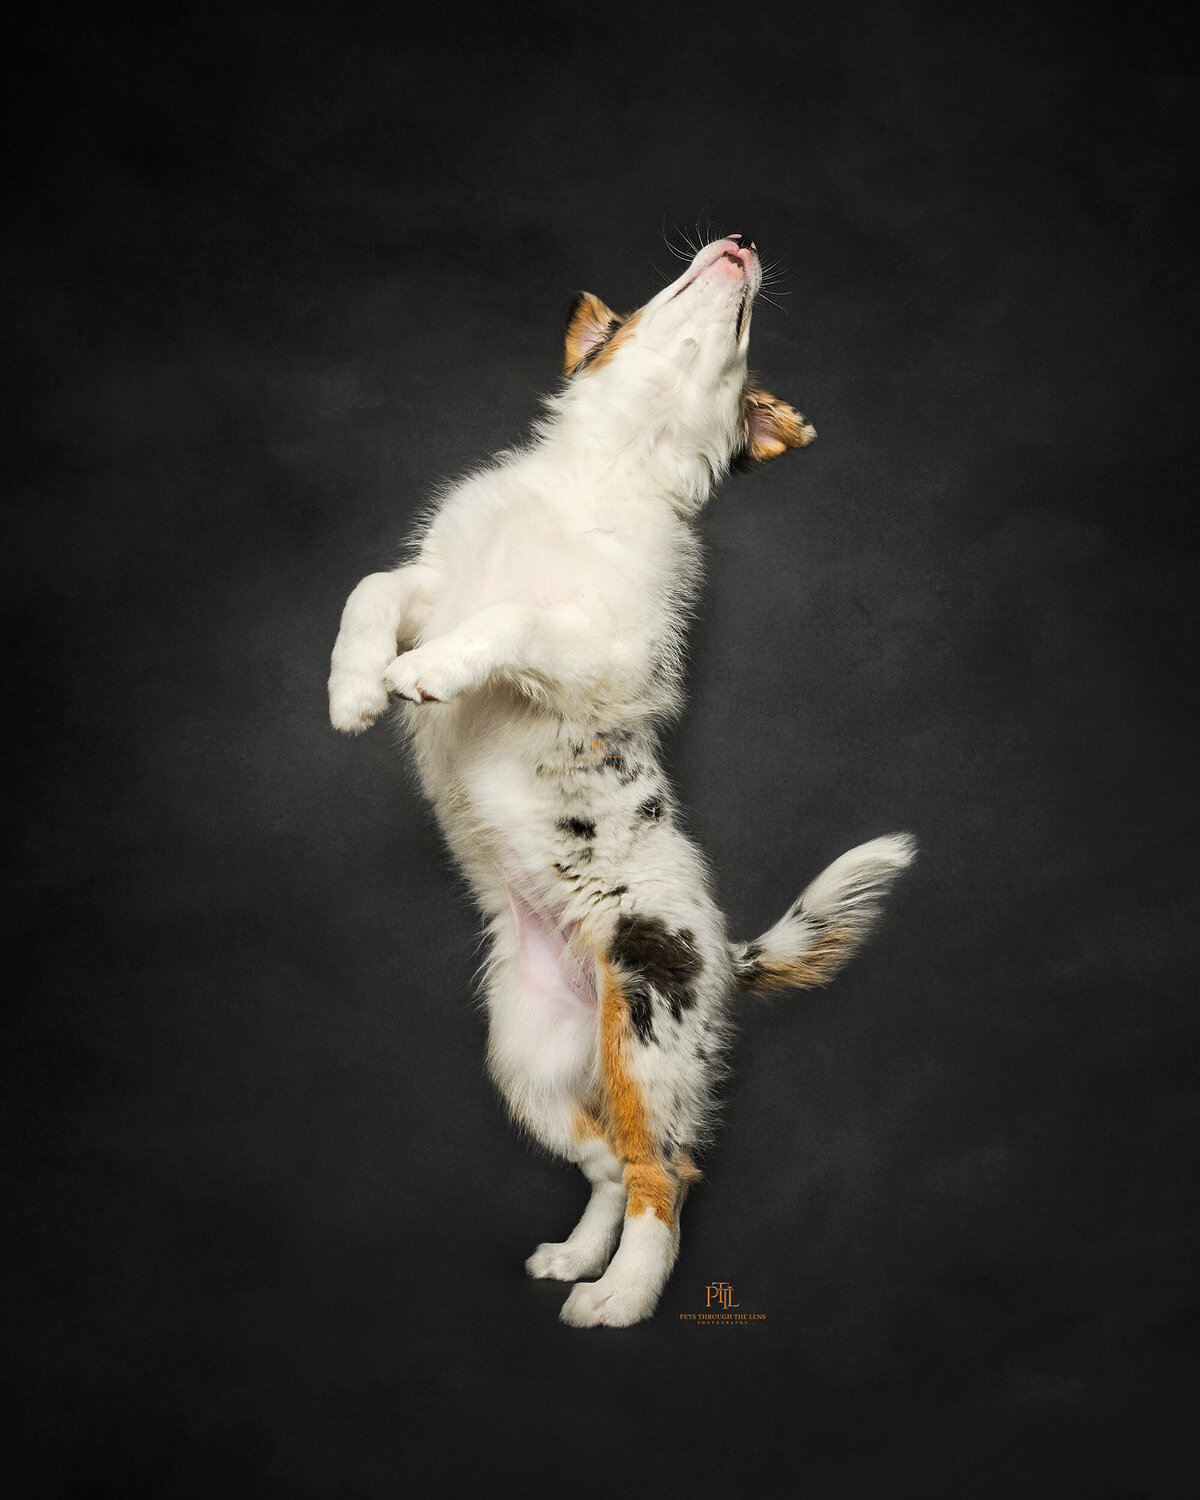 Explore the elegance of fine art dog portrait photography in Vancouver with Pets through the Lens Photography. This captivating image features an energetic dog captured mid-air, showcasing its playful and dynamic spirit against a dark, artistic backdrop. Our professional pet photography studio specializes in creating high-quality, painterly portraits that highlight the unique beauty and personality of your pet. Choose Pets through the Lens Photography for an exquisite and timeless pet photography experience in Vancouver.